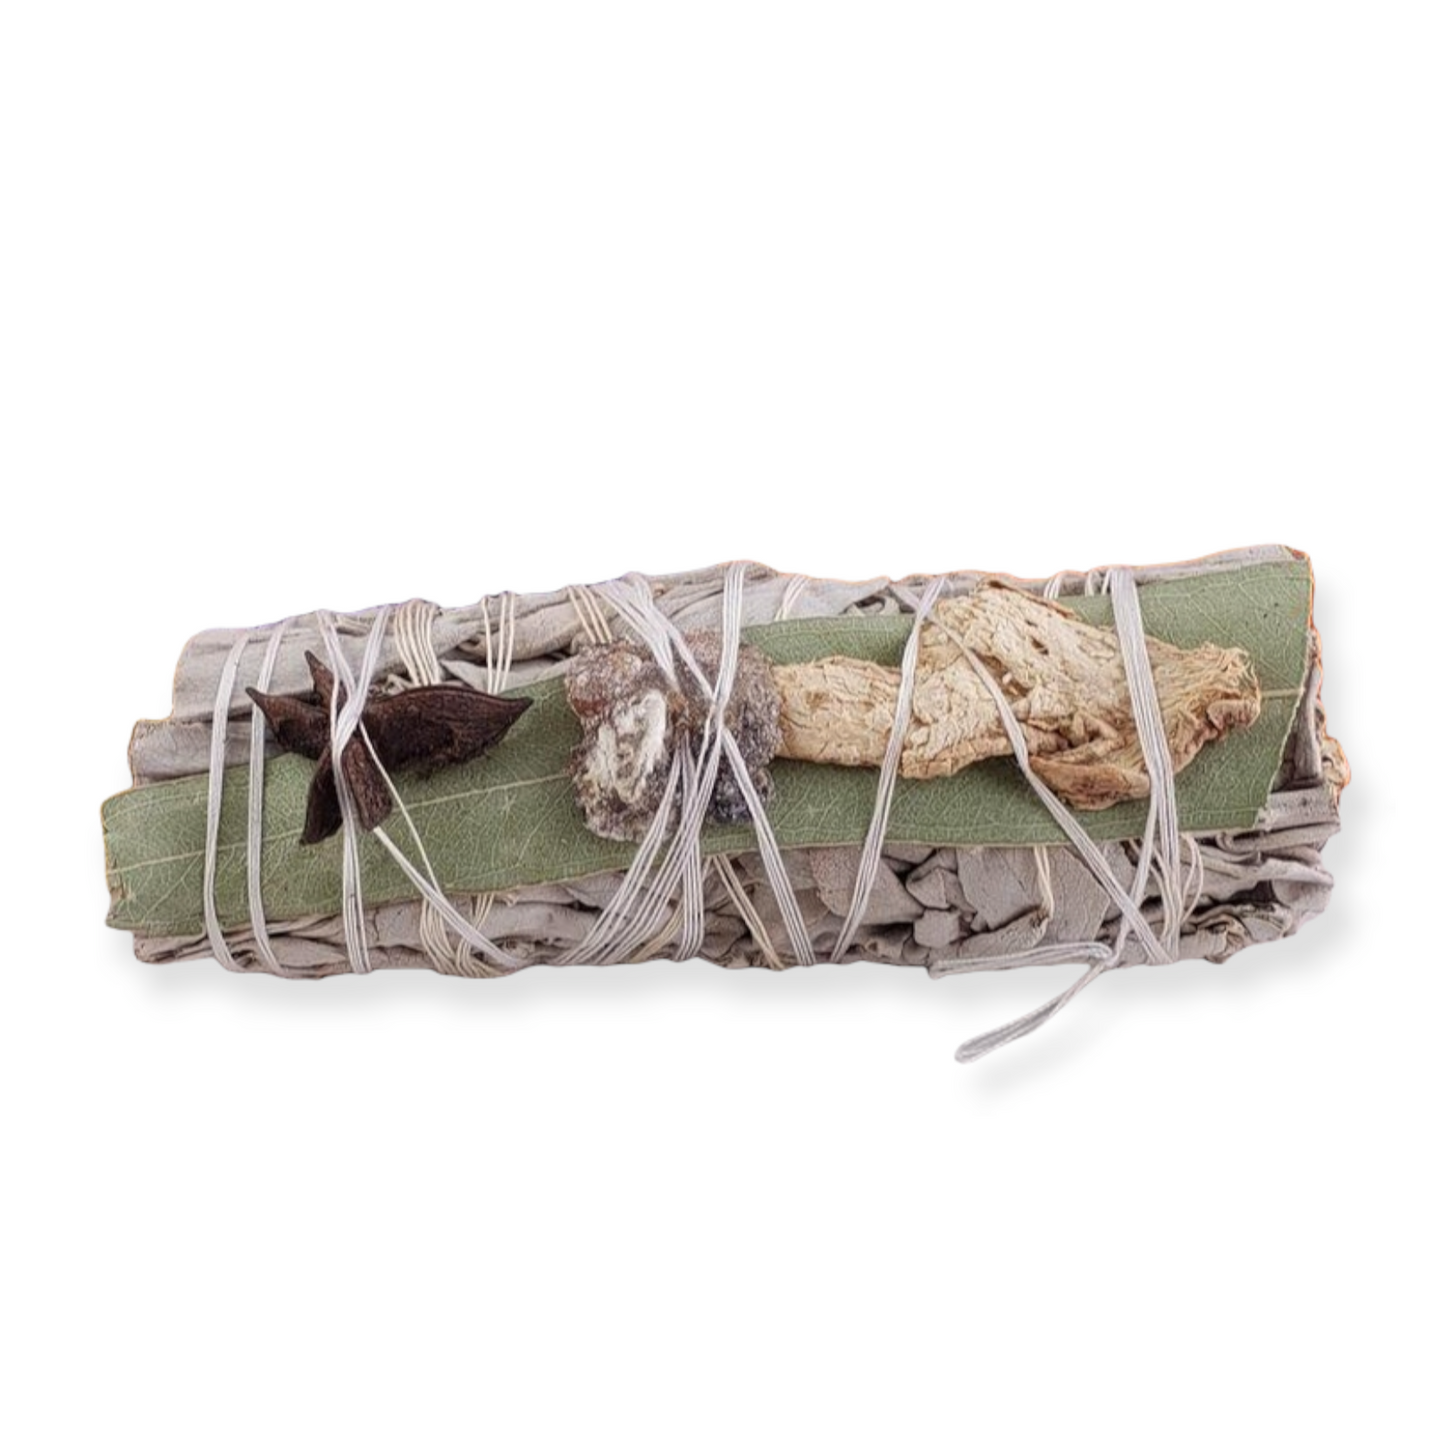 Anise Star, Copal Resin, Sage Smudge Stick